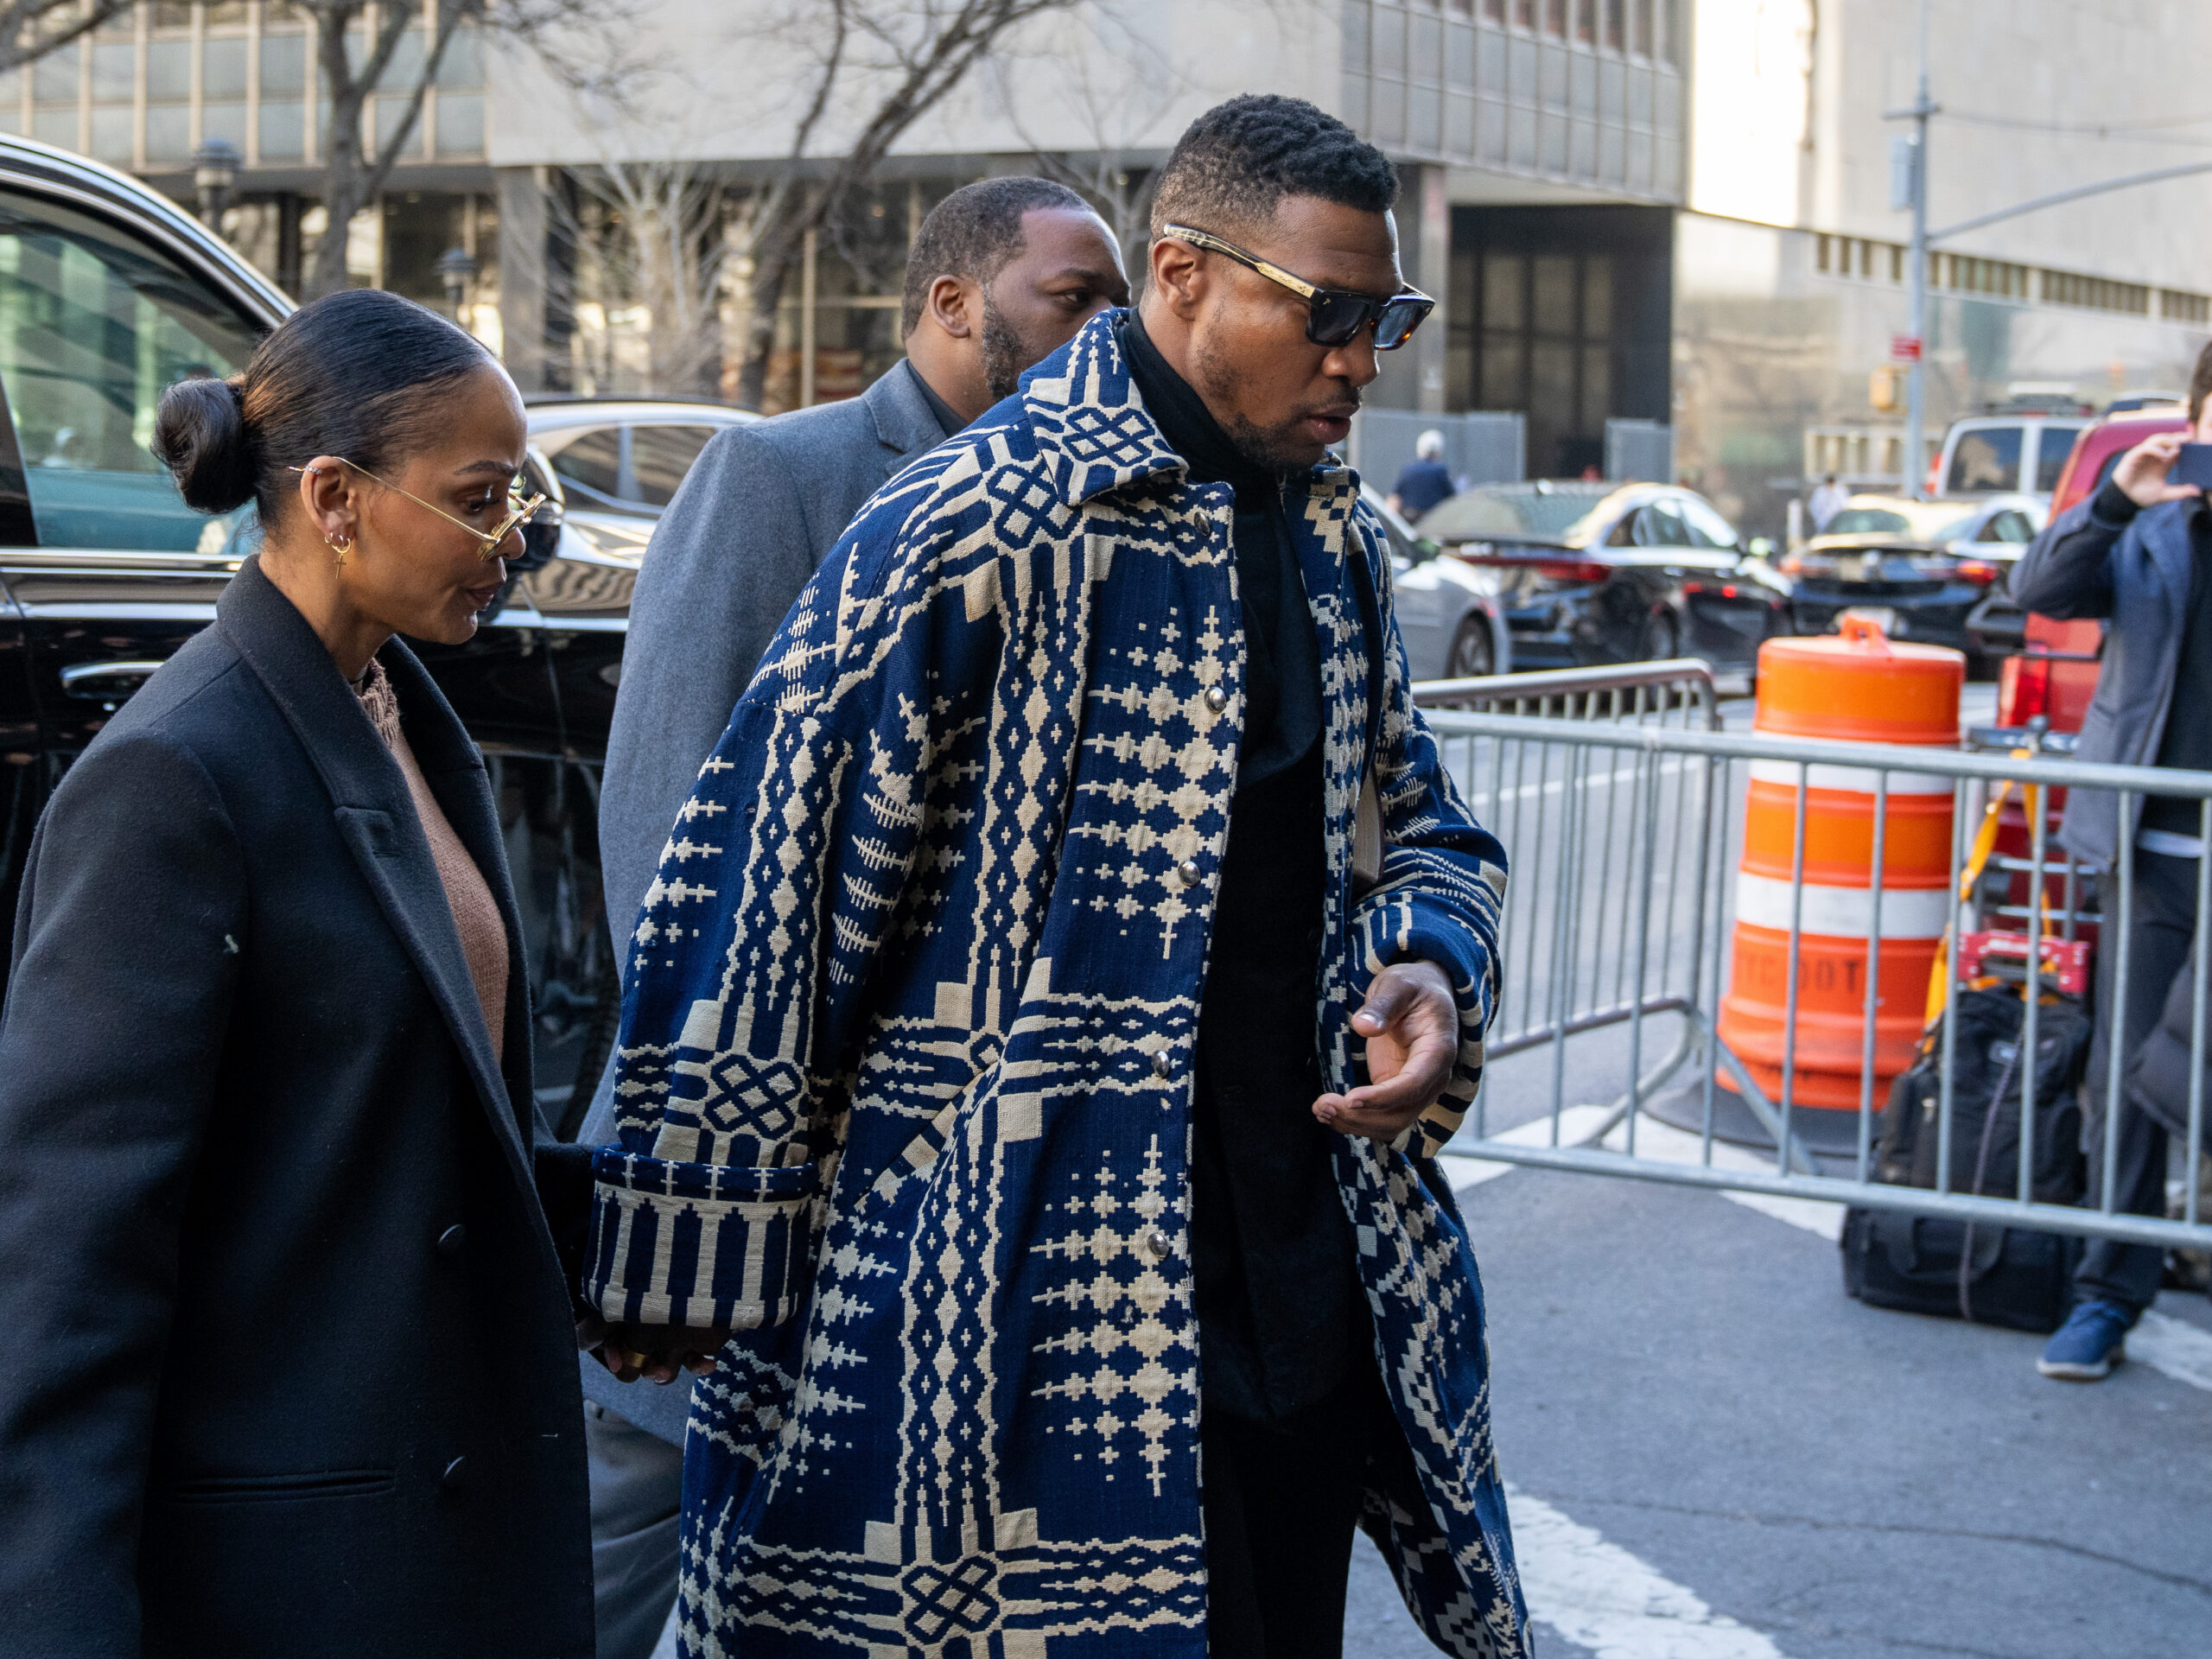 Actor Jonathan Majors arriving in court for his sentencing Monday morning in Manhattan, accompanied by his current partner, Meagan Good.